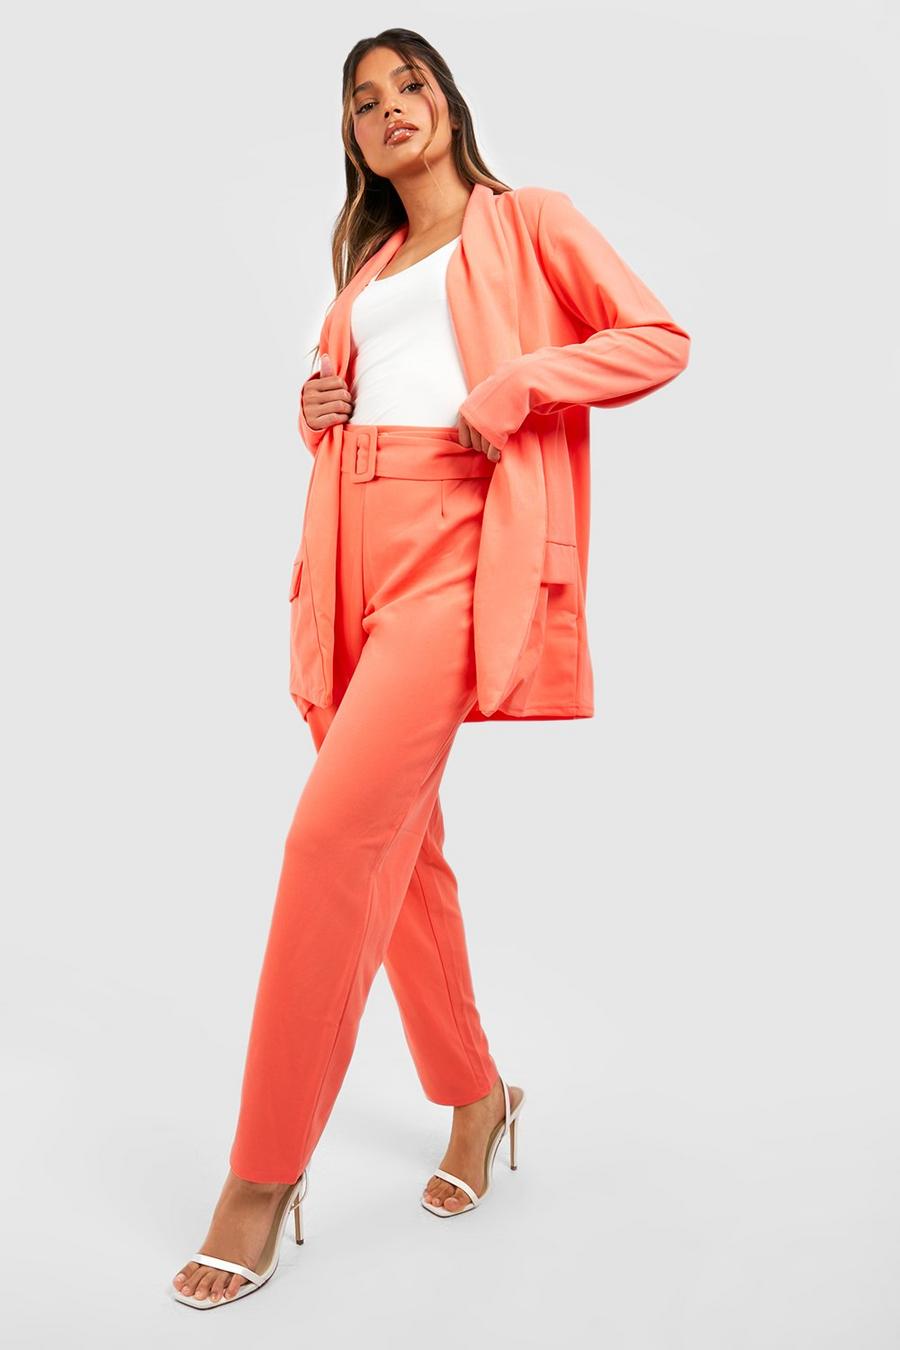 Coral pink Tailored Blazer And Self Fabric Belt Trouser Suit